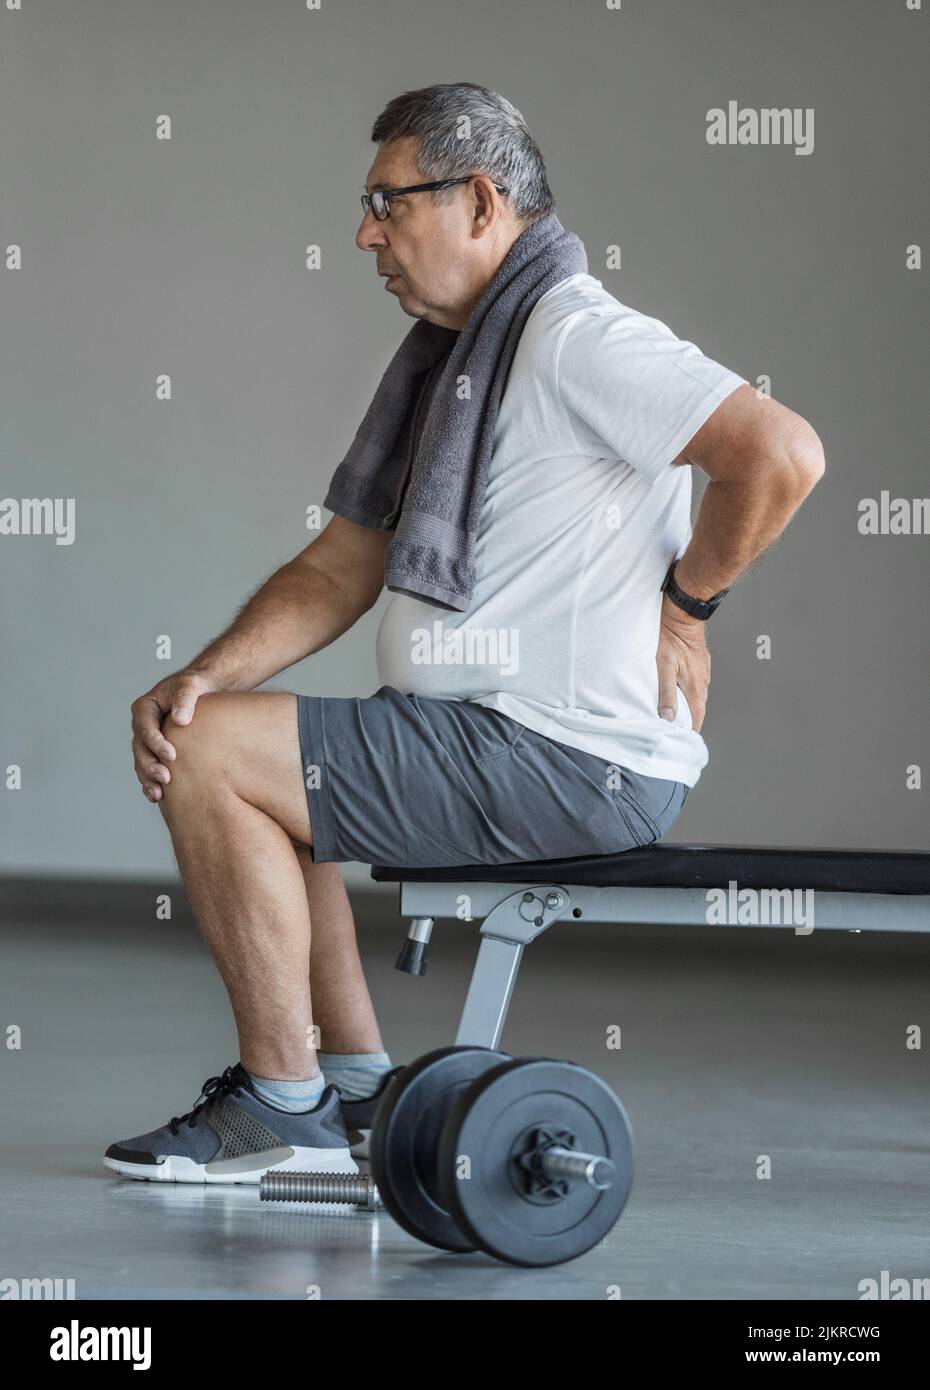 Active senior man in gym with back pain Stock Photo